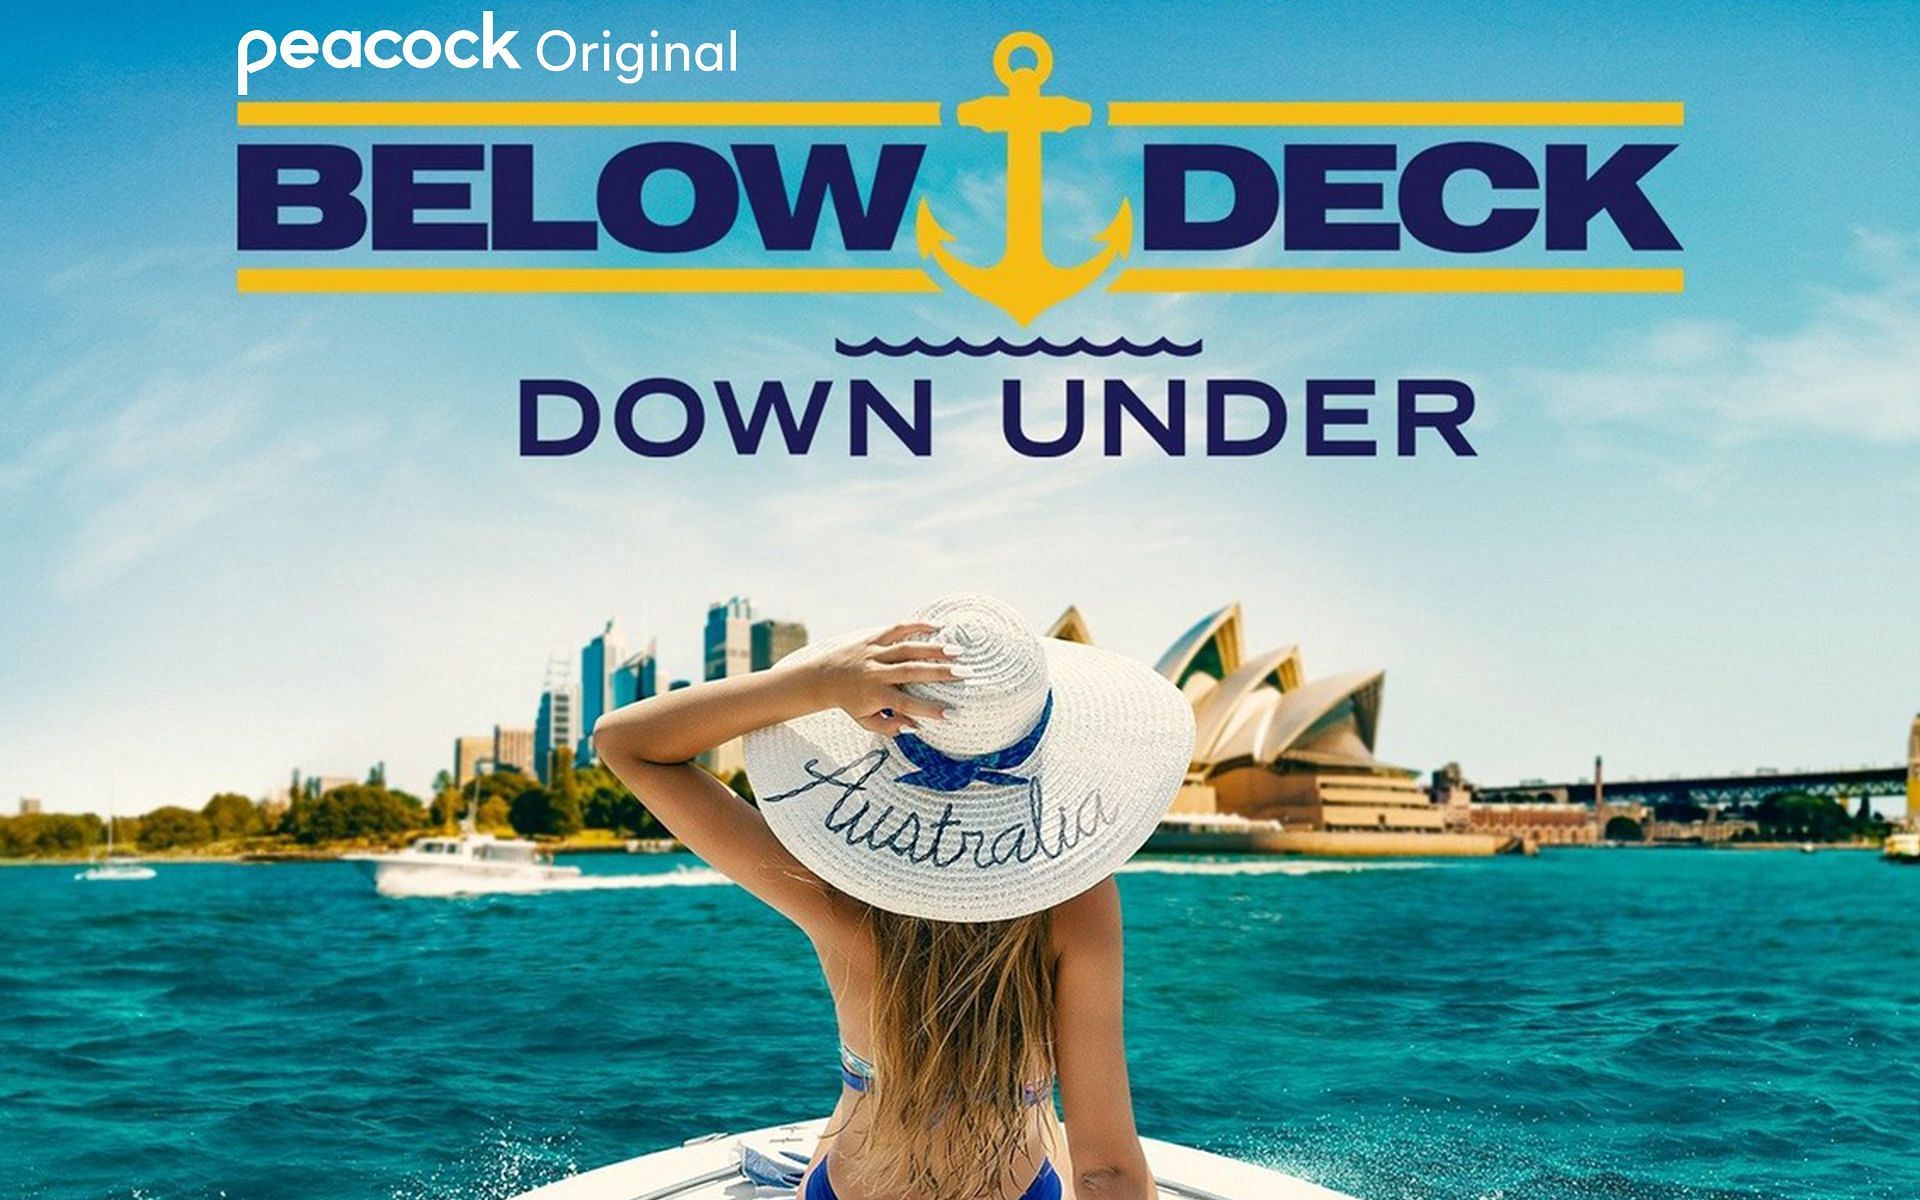 Below Deck Down Under to air on March 17 on Peacock (Image via captainjchambers/Instagram)